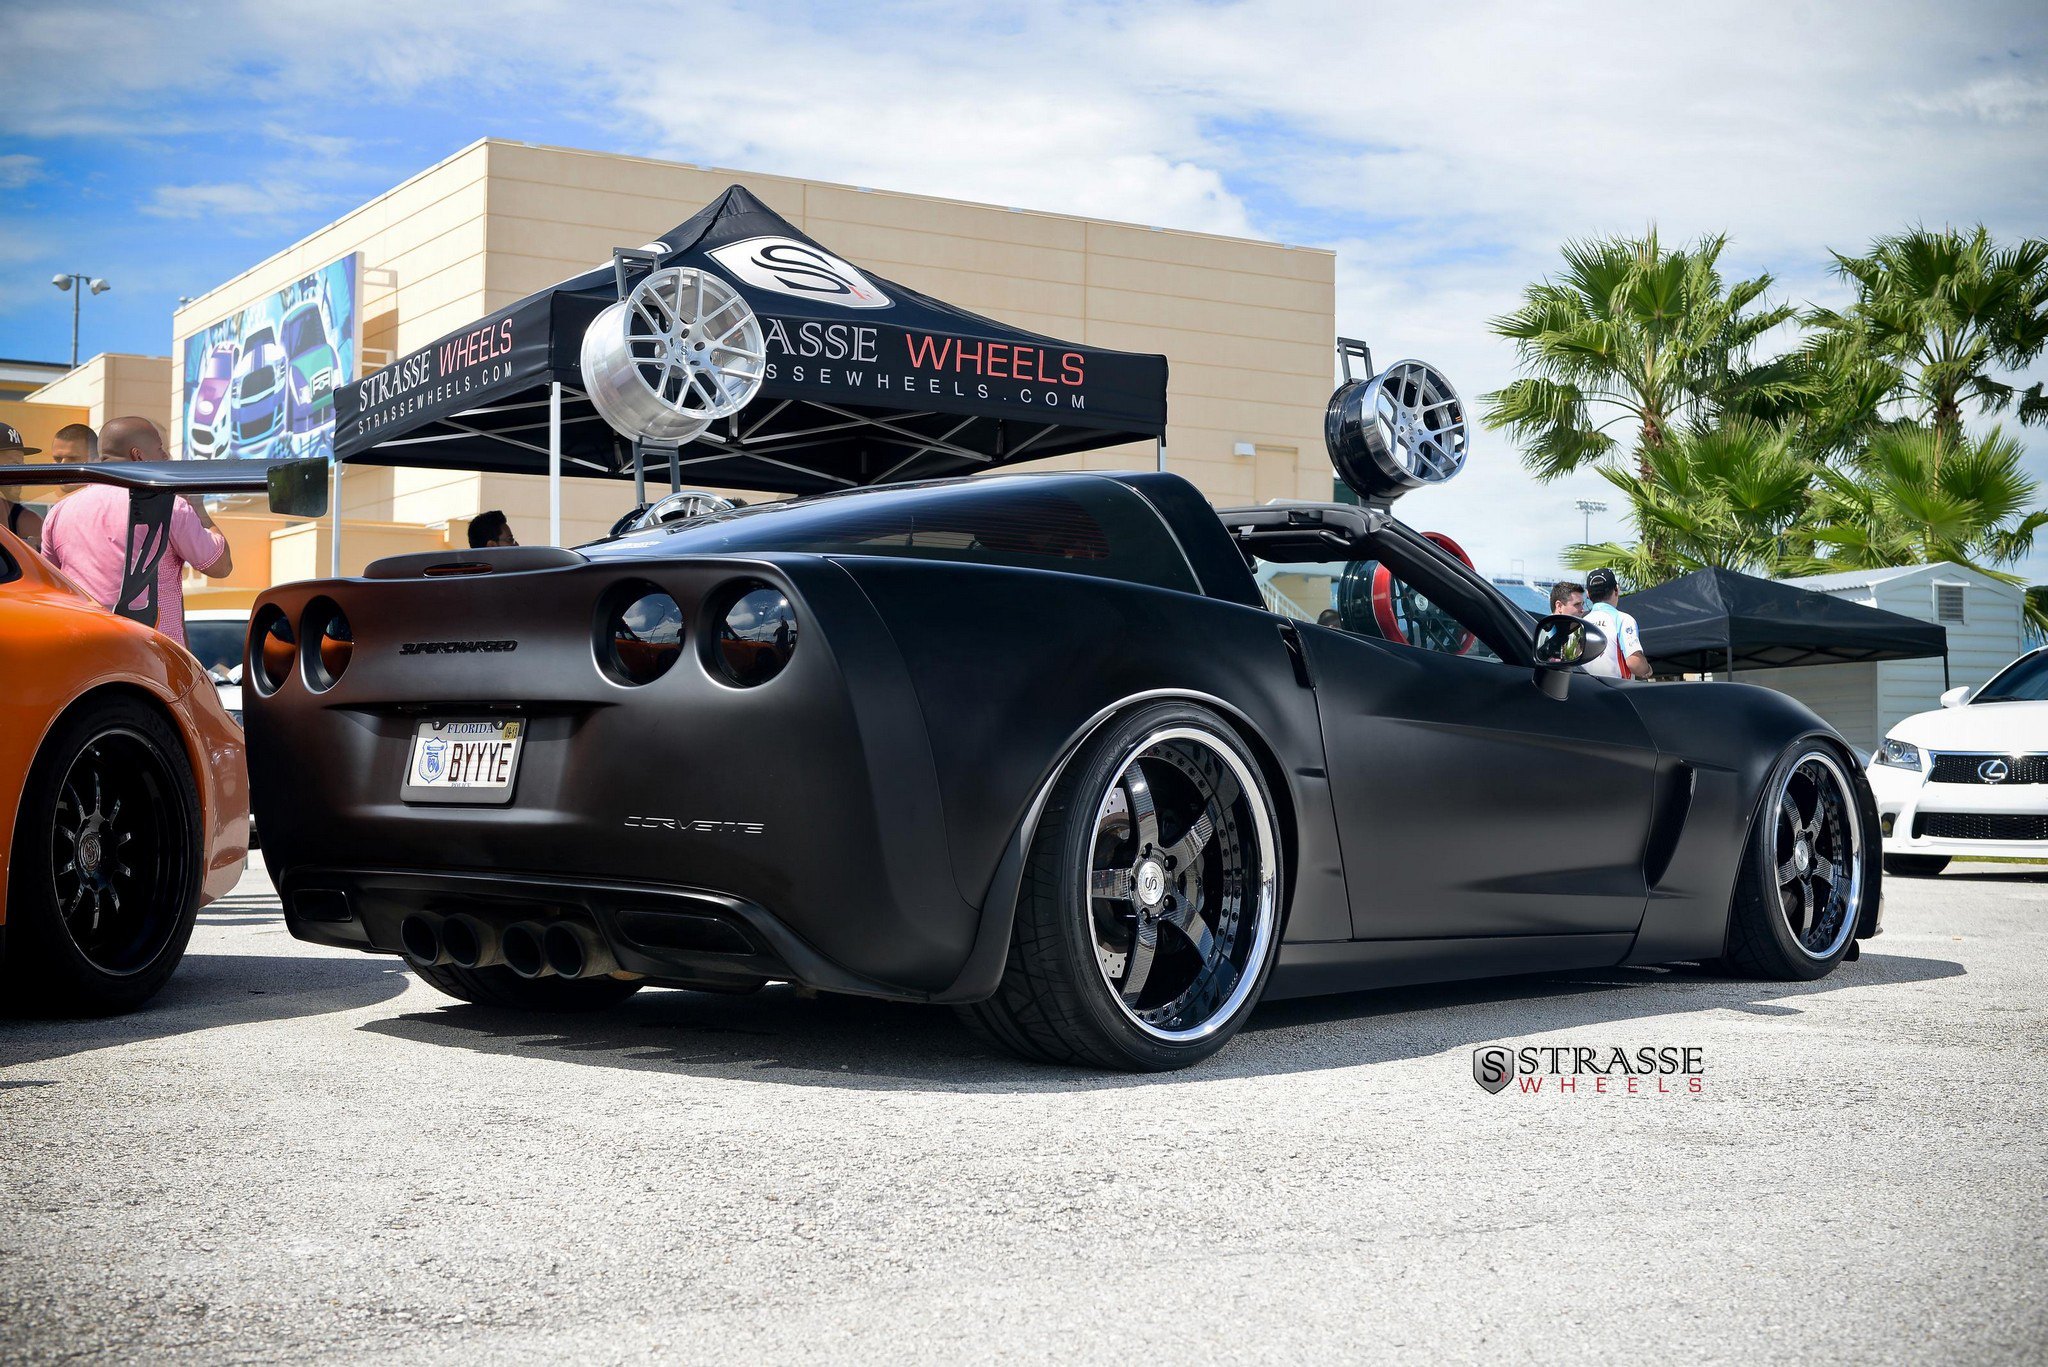 Aftermarket Rear Diffuser on Gray Matte Chevy Corvette - Photo by Strasse Forged